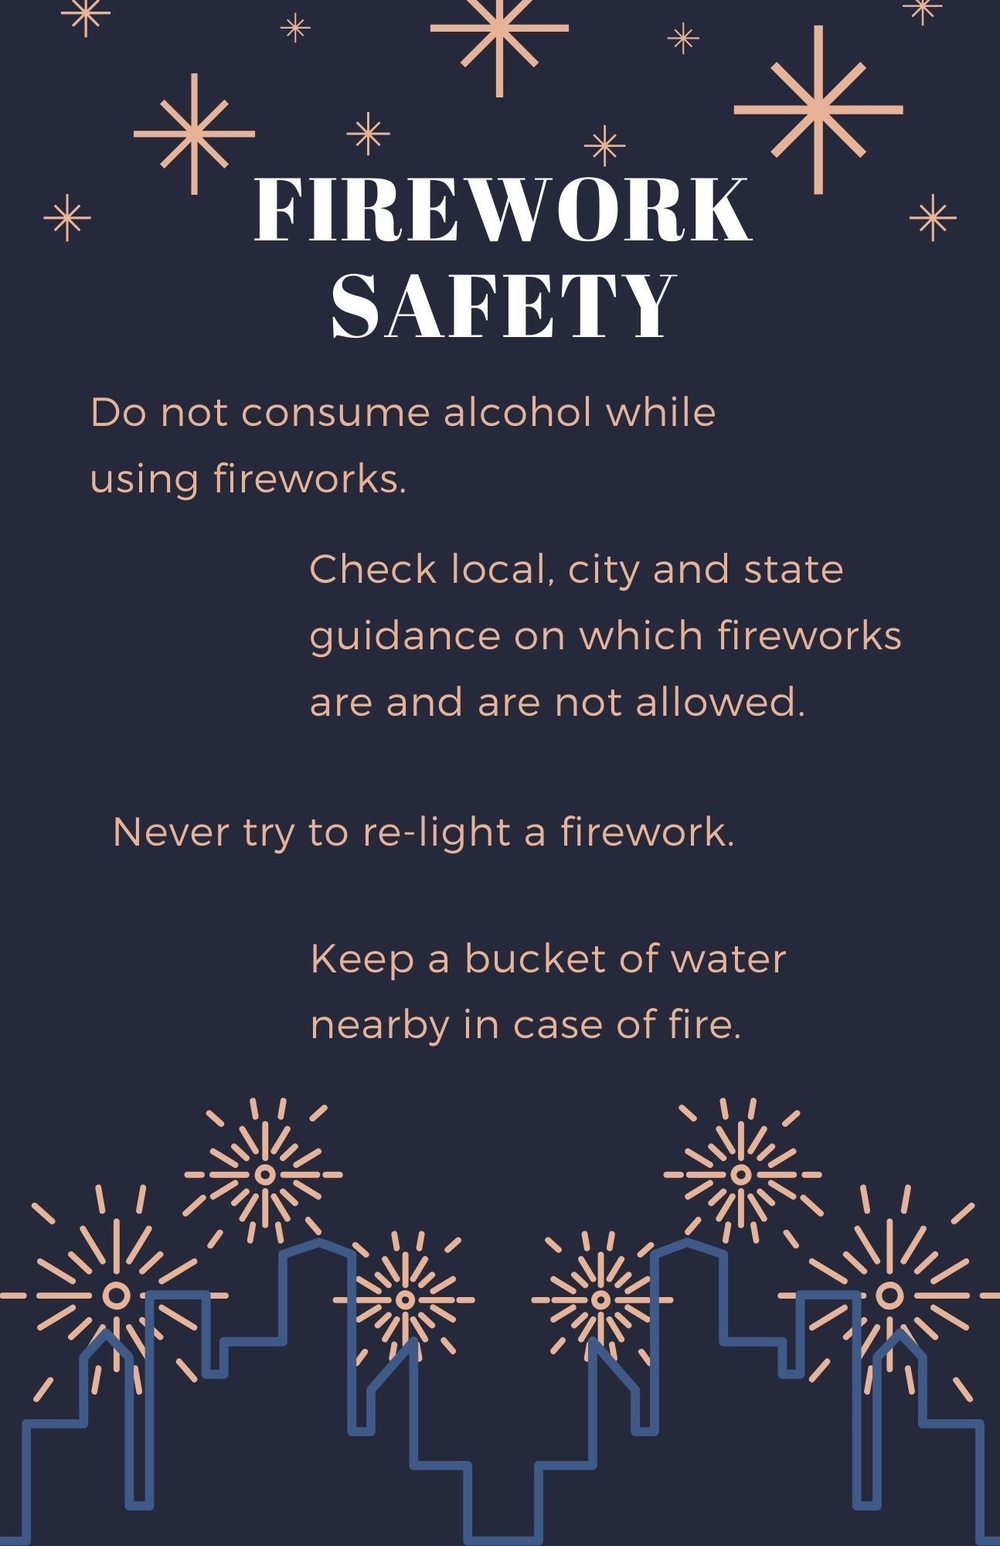 Fireworks, flames and safety